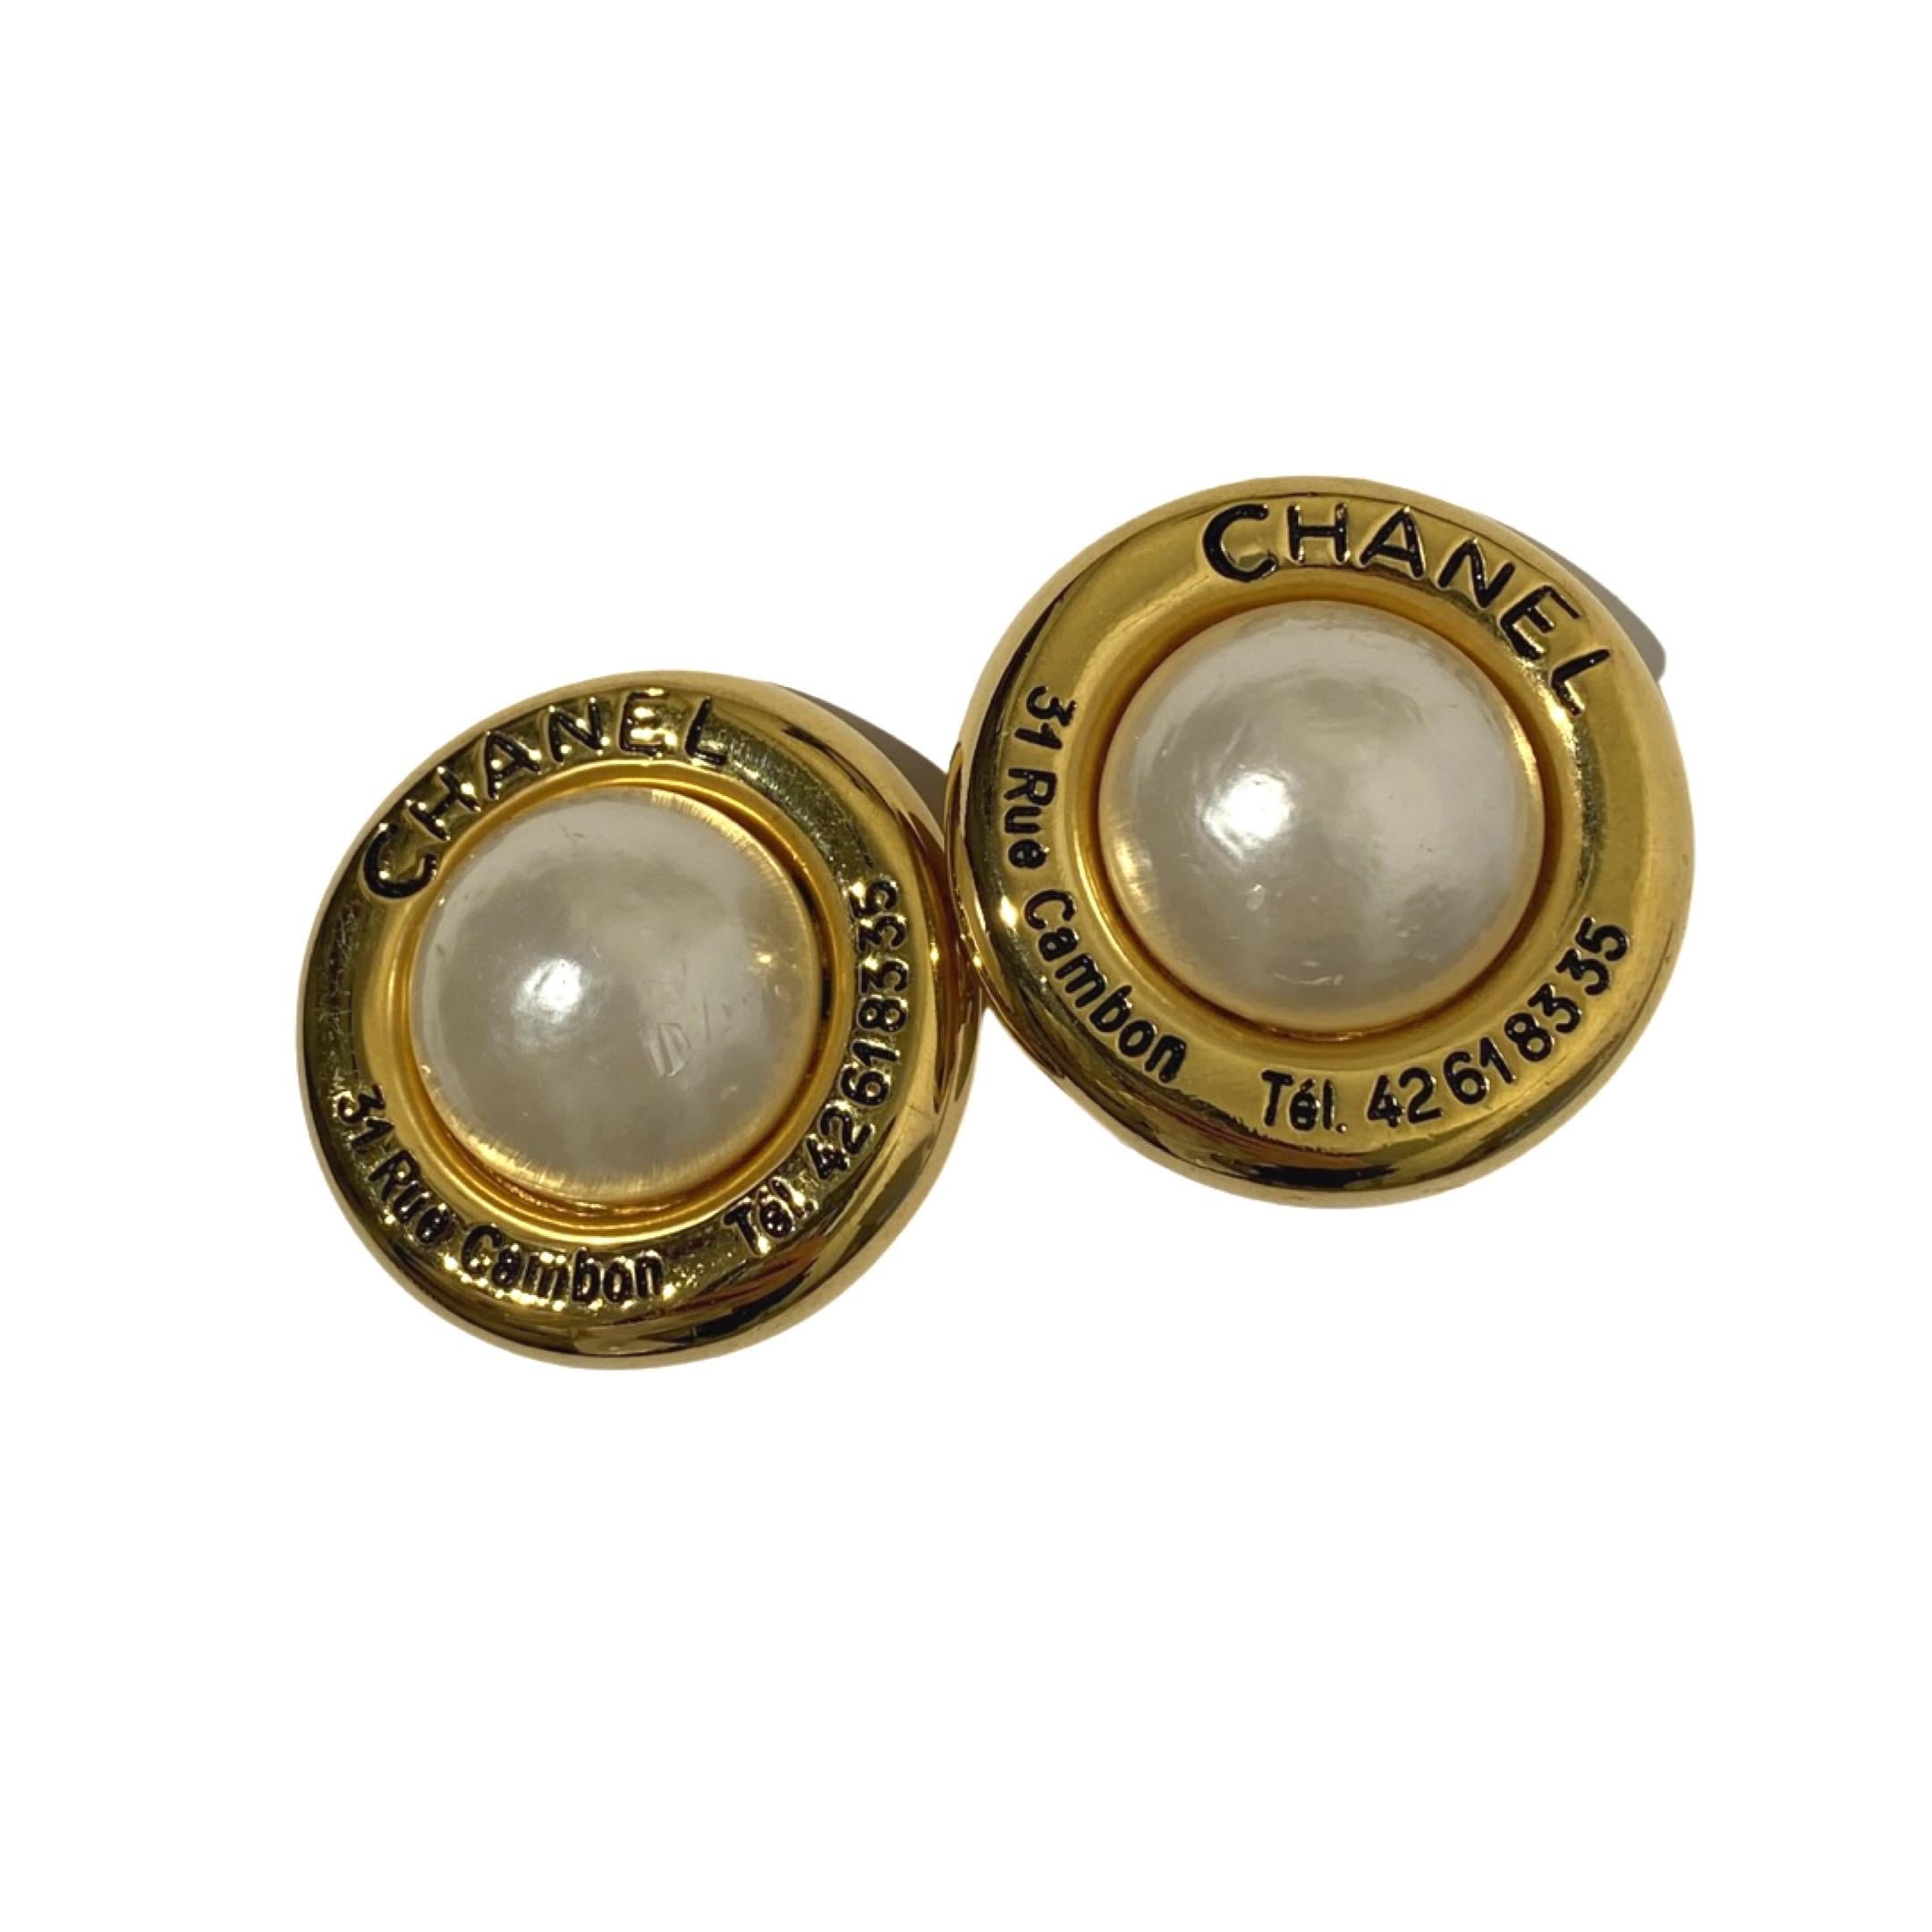 Brand : Chanel
Condition Rank : 7/10 (The pearl has some minor imperfection. Some parts are lightly tarnished on the back. Overall still in great vintage condition)
Dimensions : Diameter 35mm
Material : Gold Plated / Faux Pearls
Color : Gold /